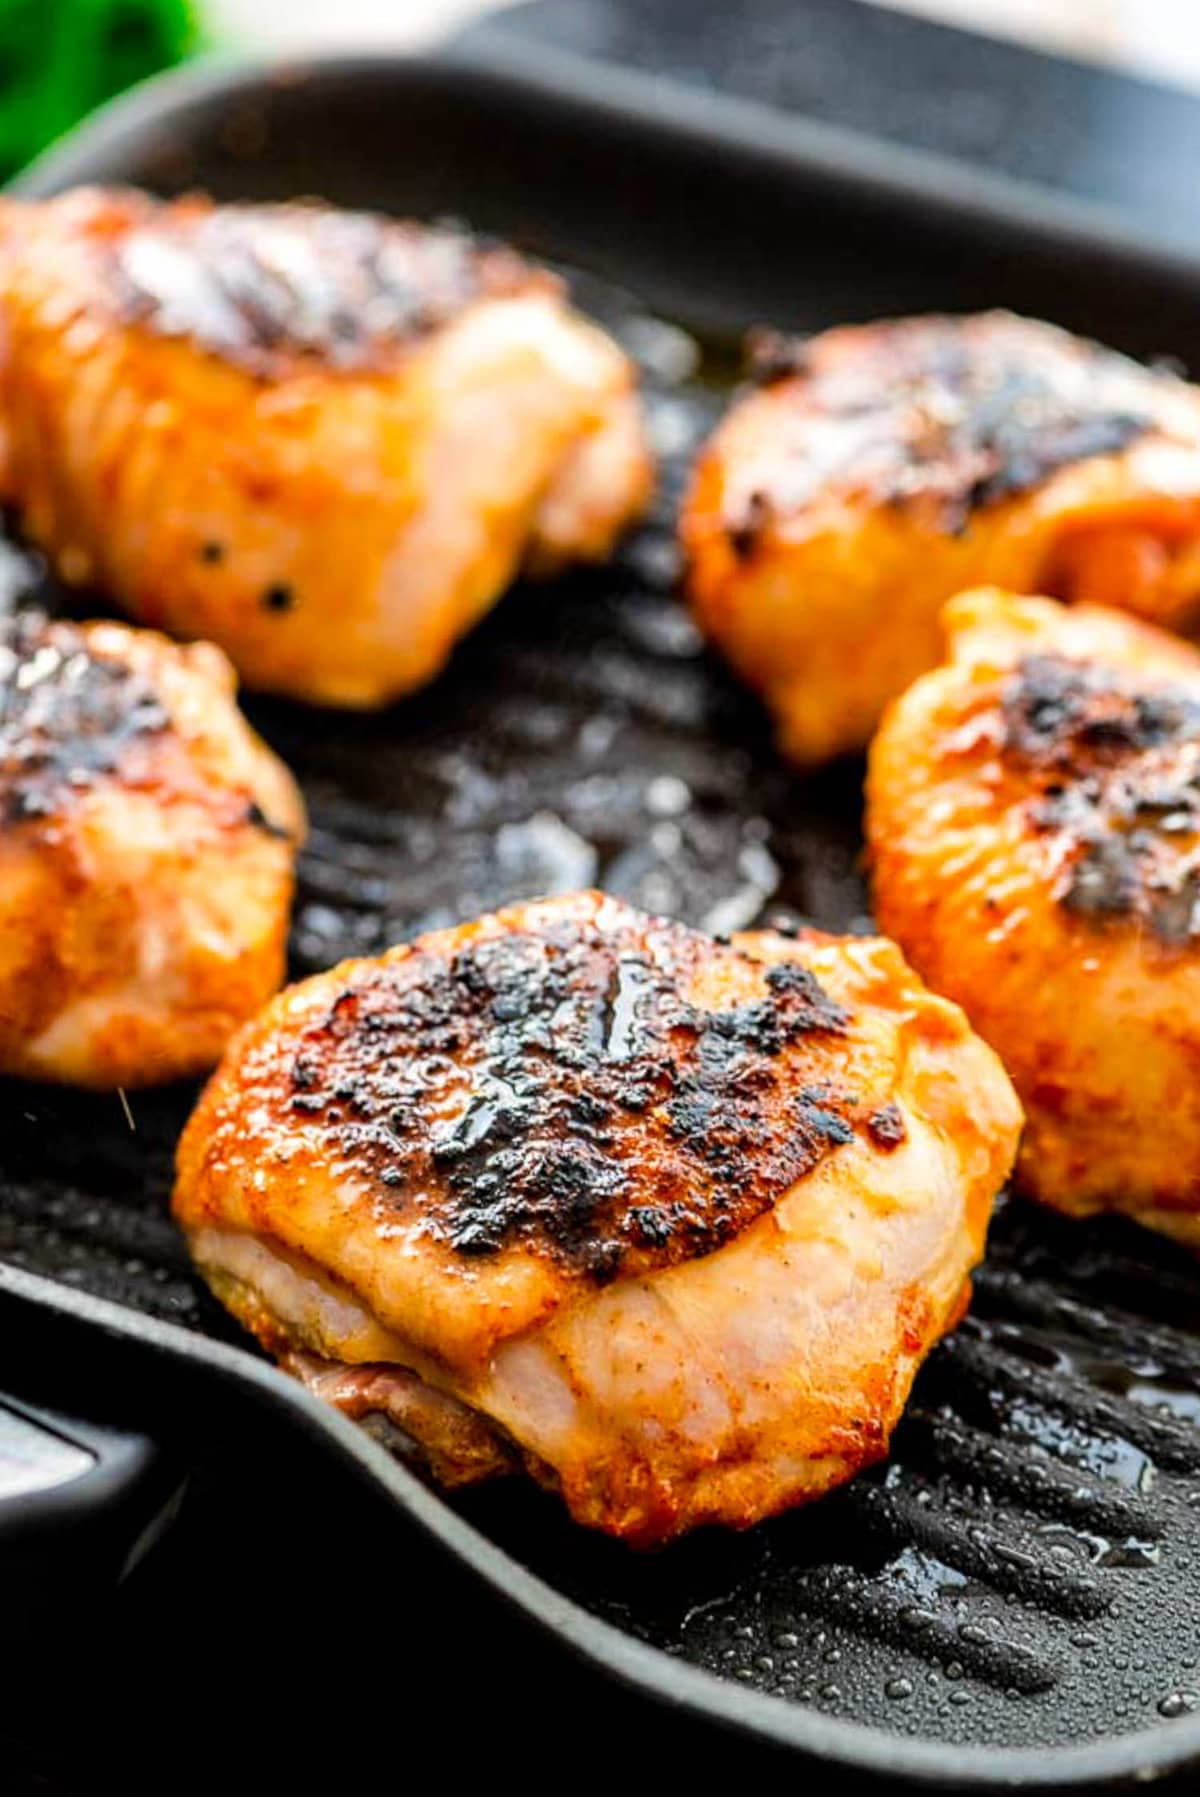 Grill pan with grilled chicken thighs